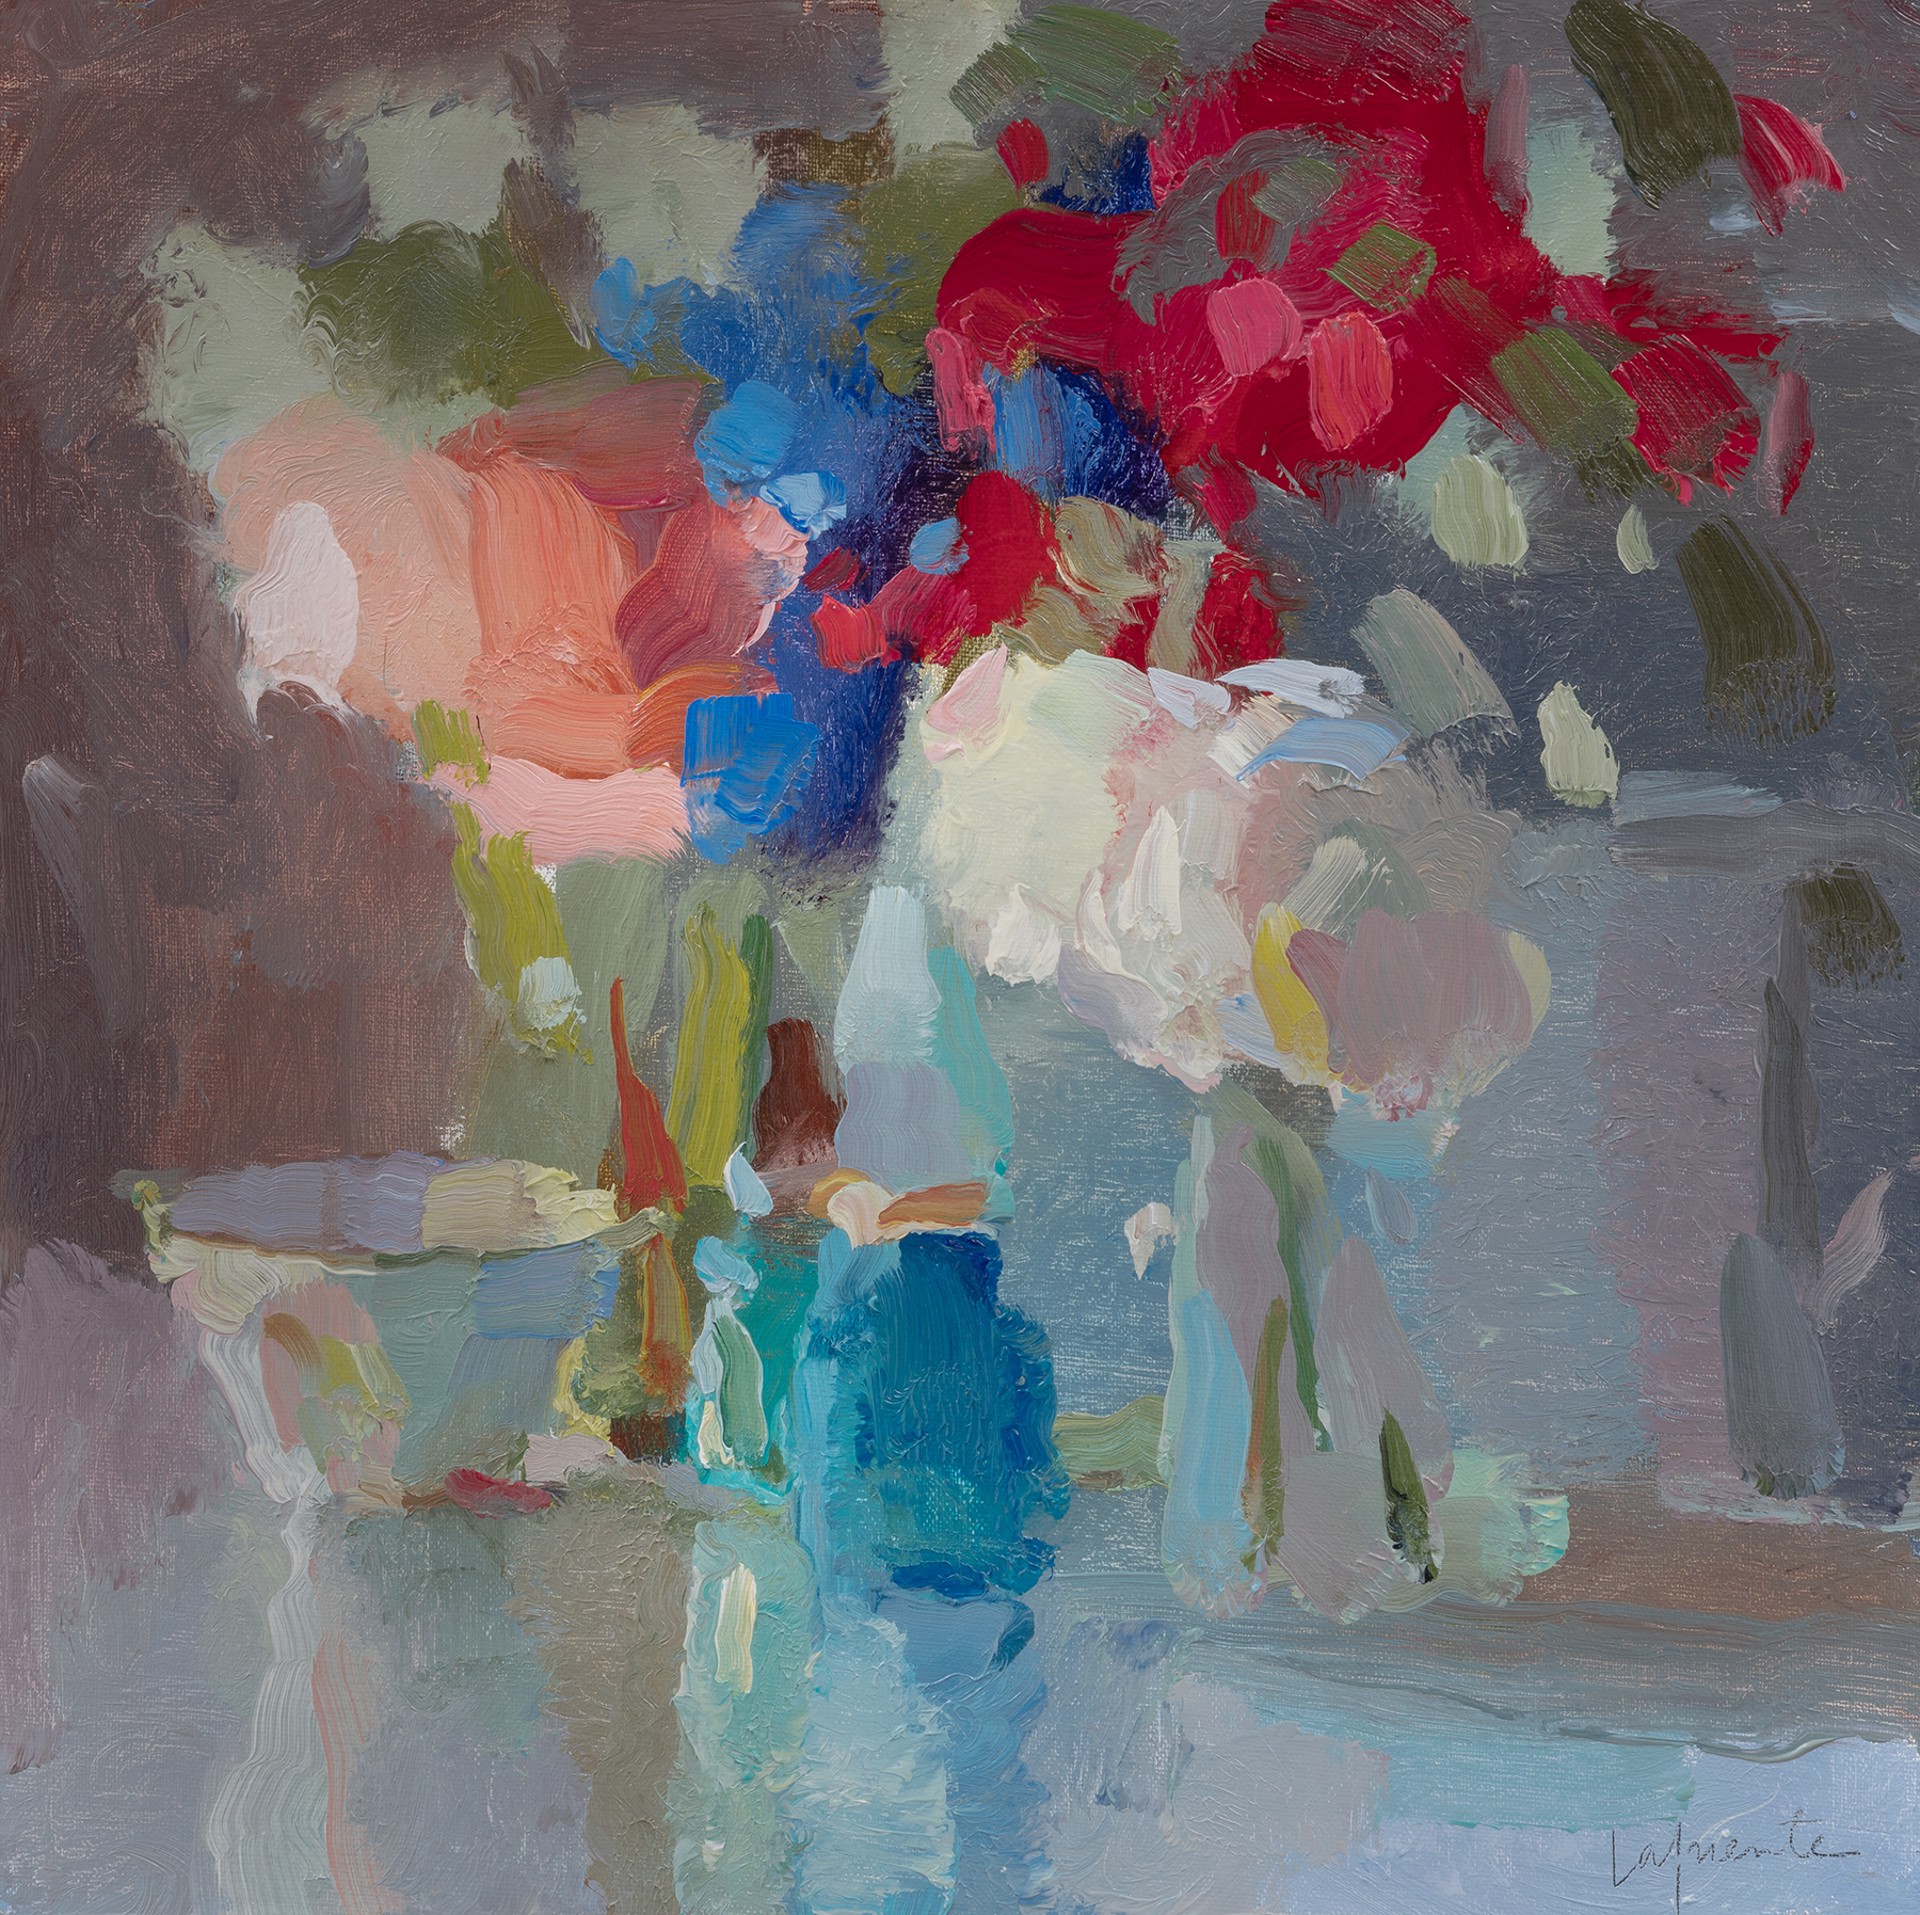 DELPHINIUM, ROSES AND BOTTLES by CHRISTINE LAFUENTE